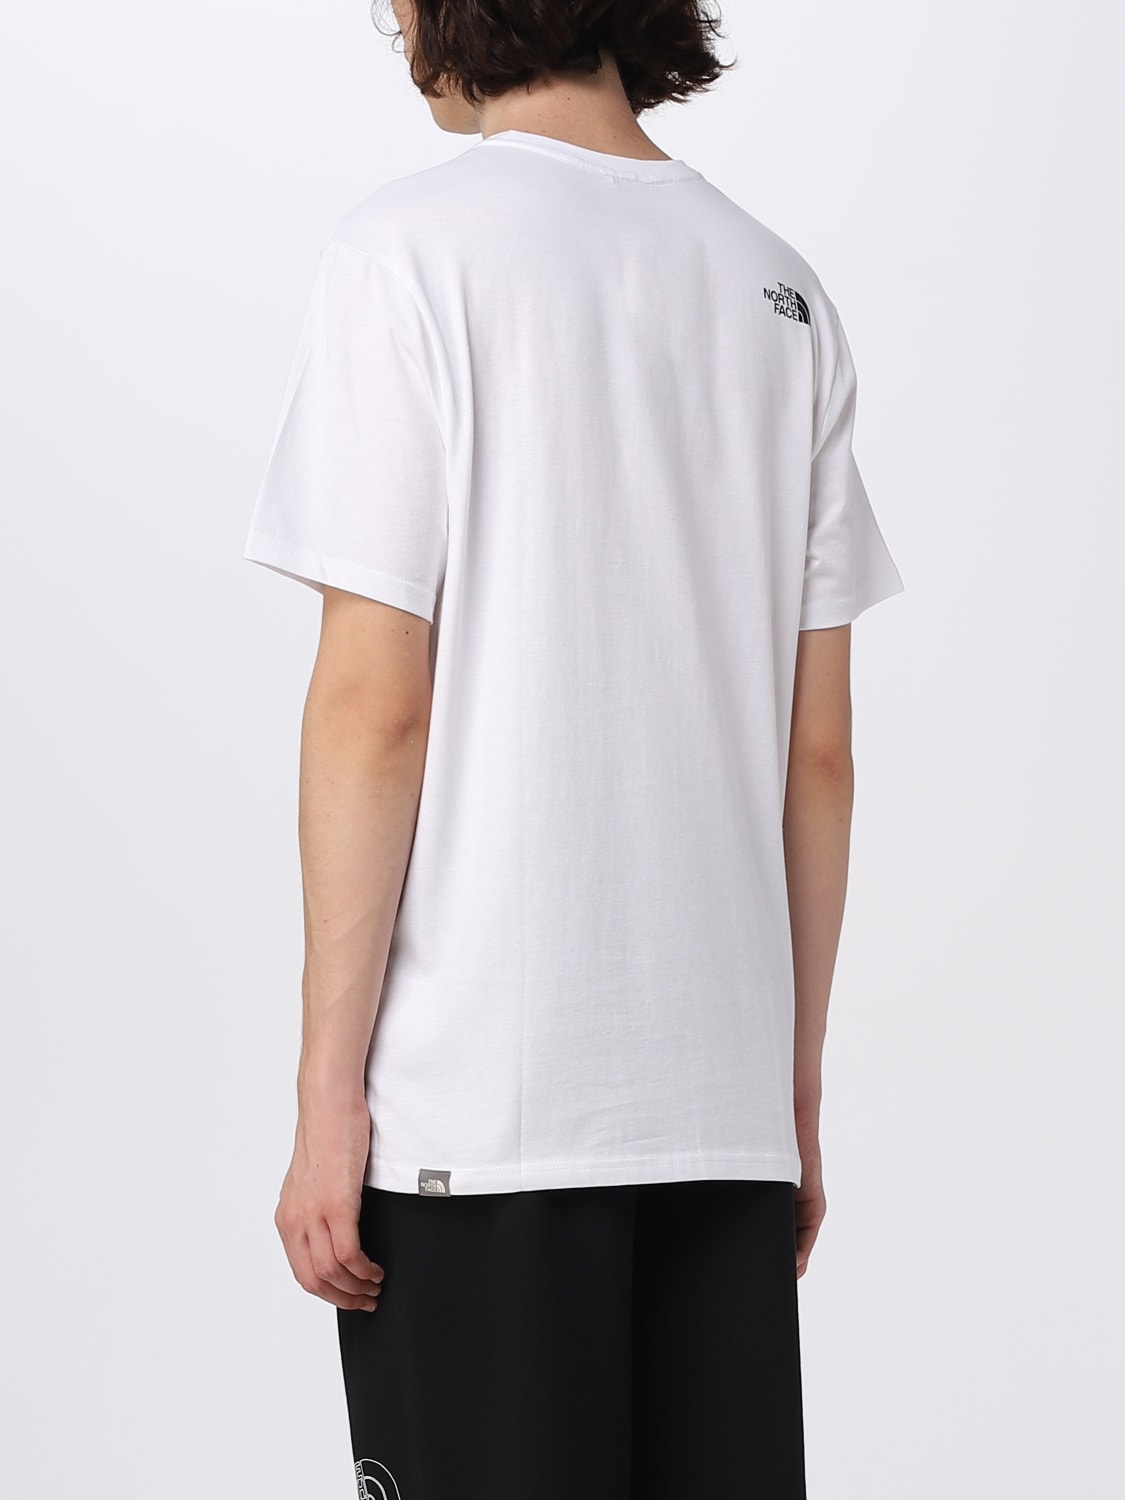 THE NORTH FACE: t-shirt for man - White | The North Face t-shirt ...